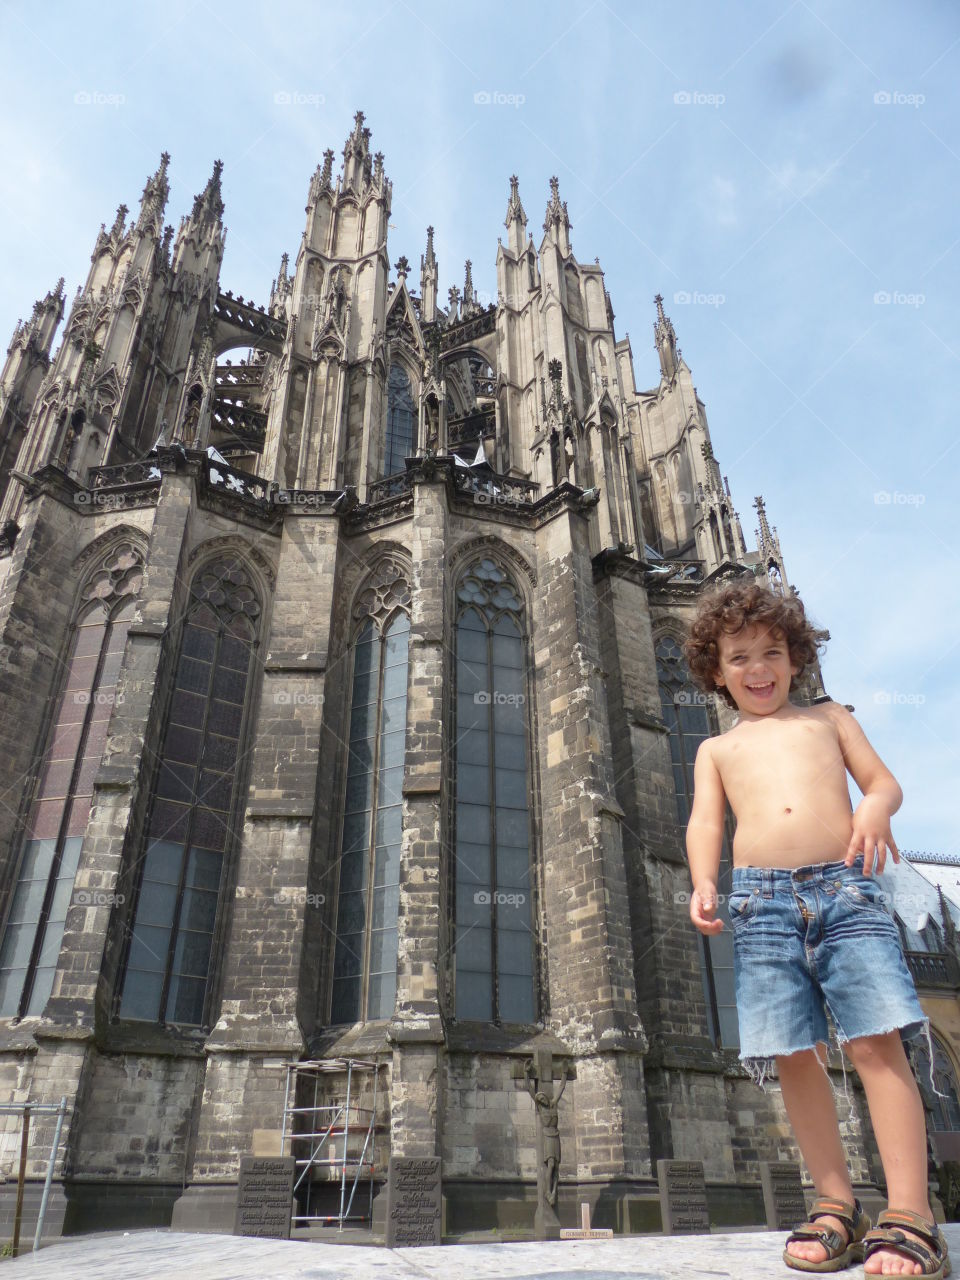 Cologne's Cathedral